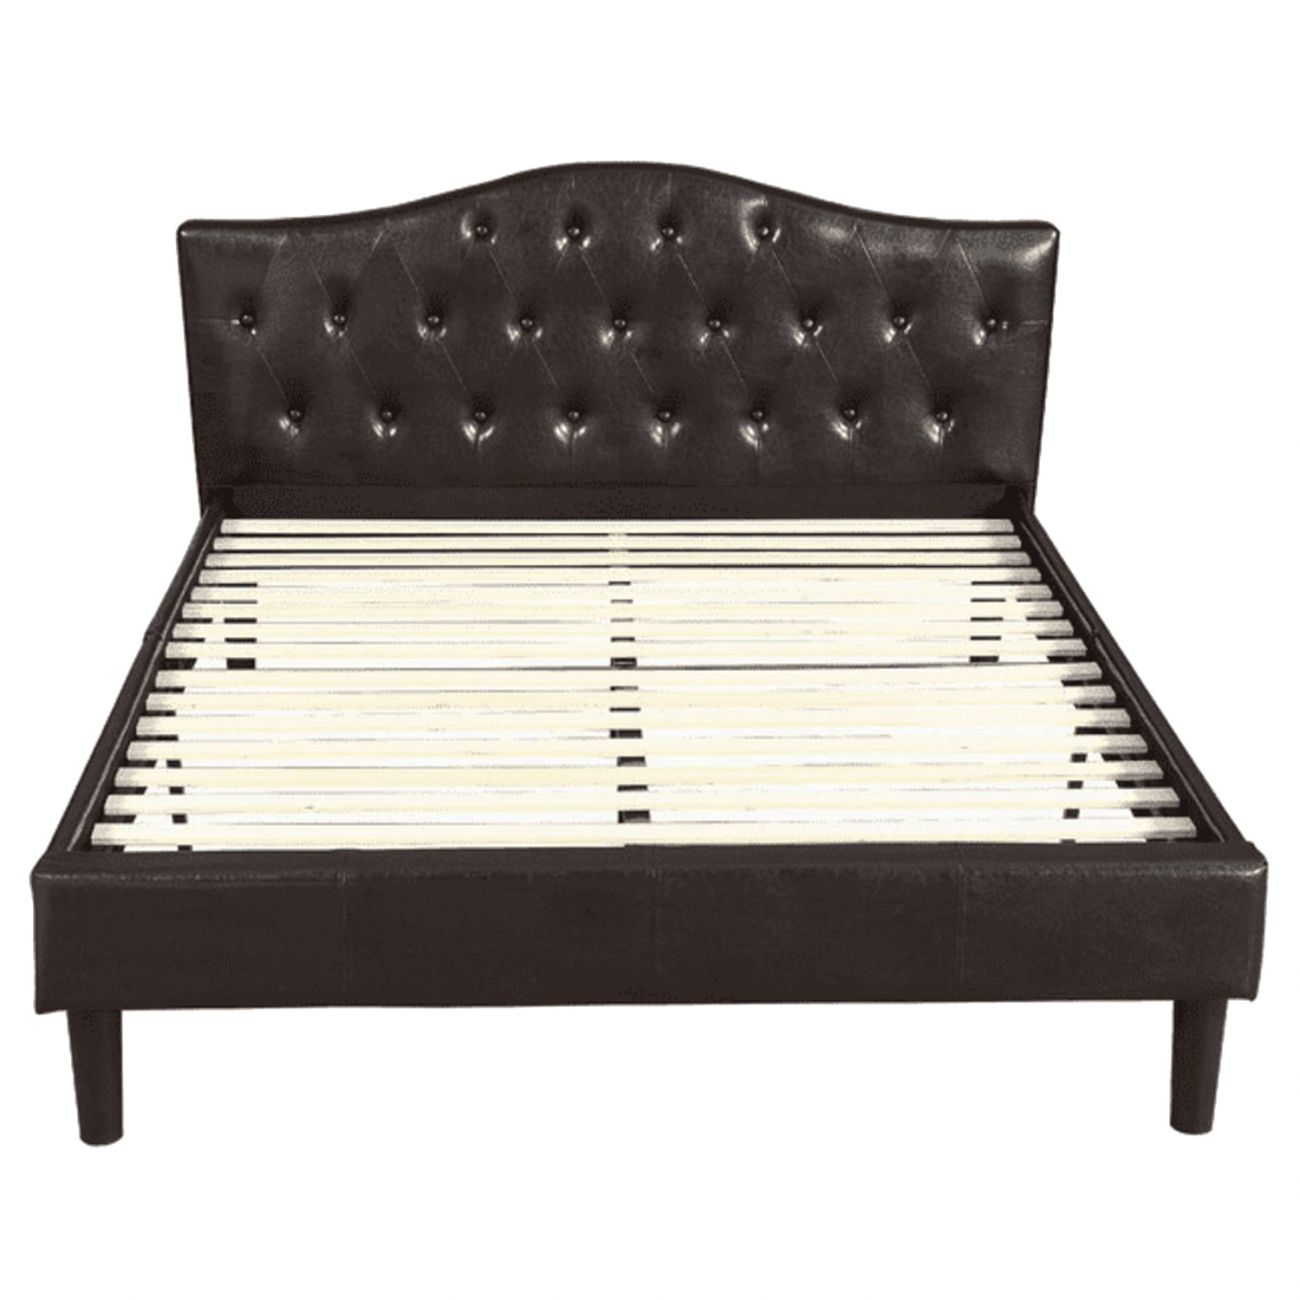 Double bed 160x200 dark brown with carriage tie Kody